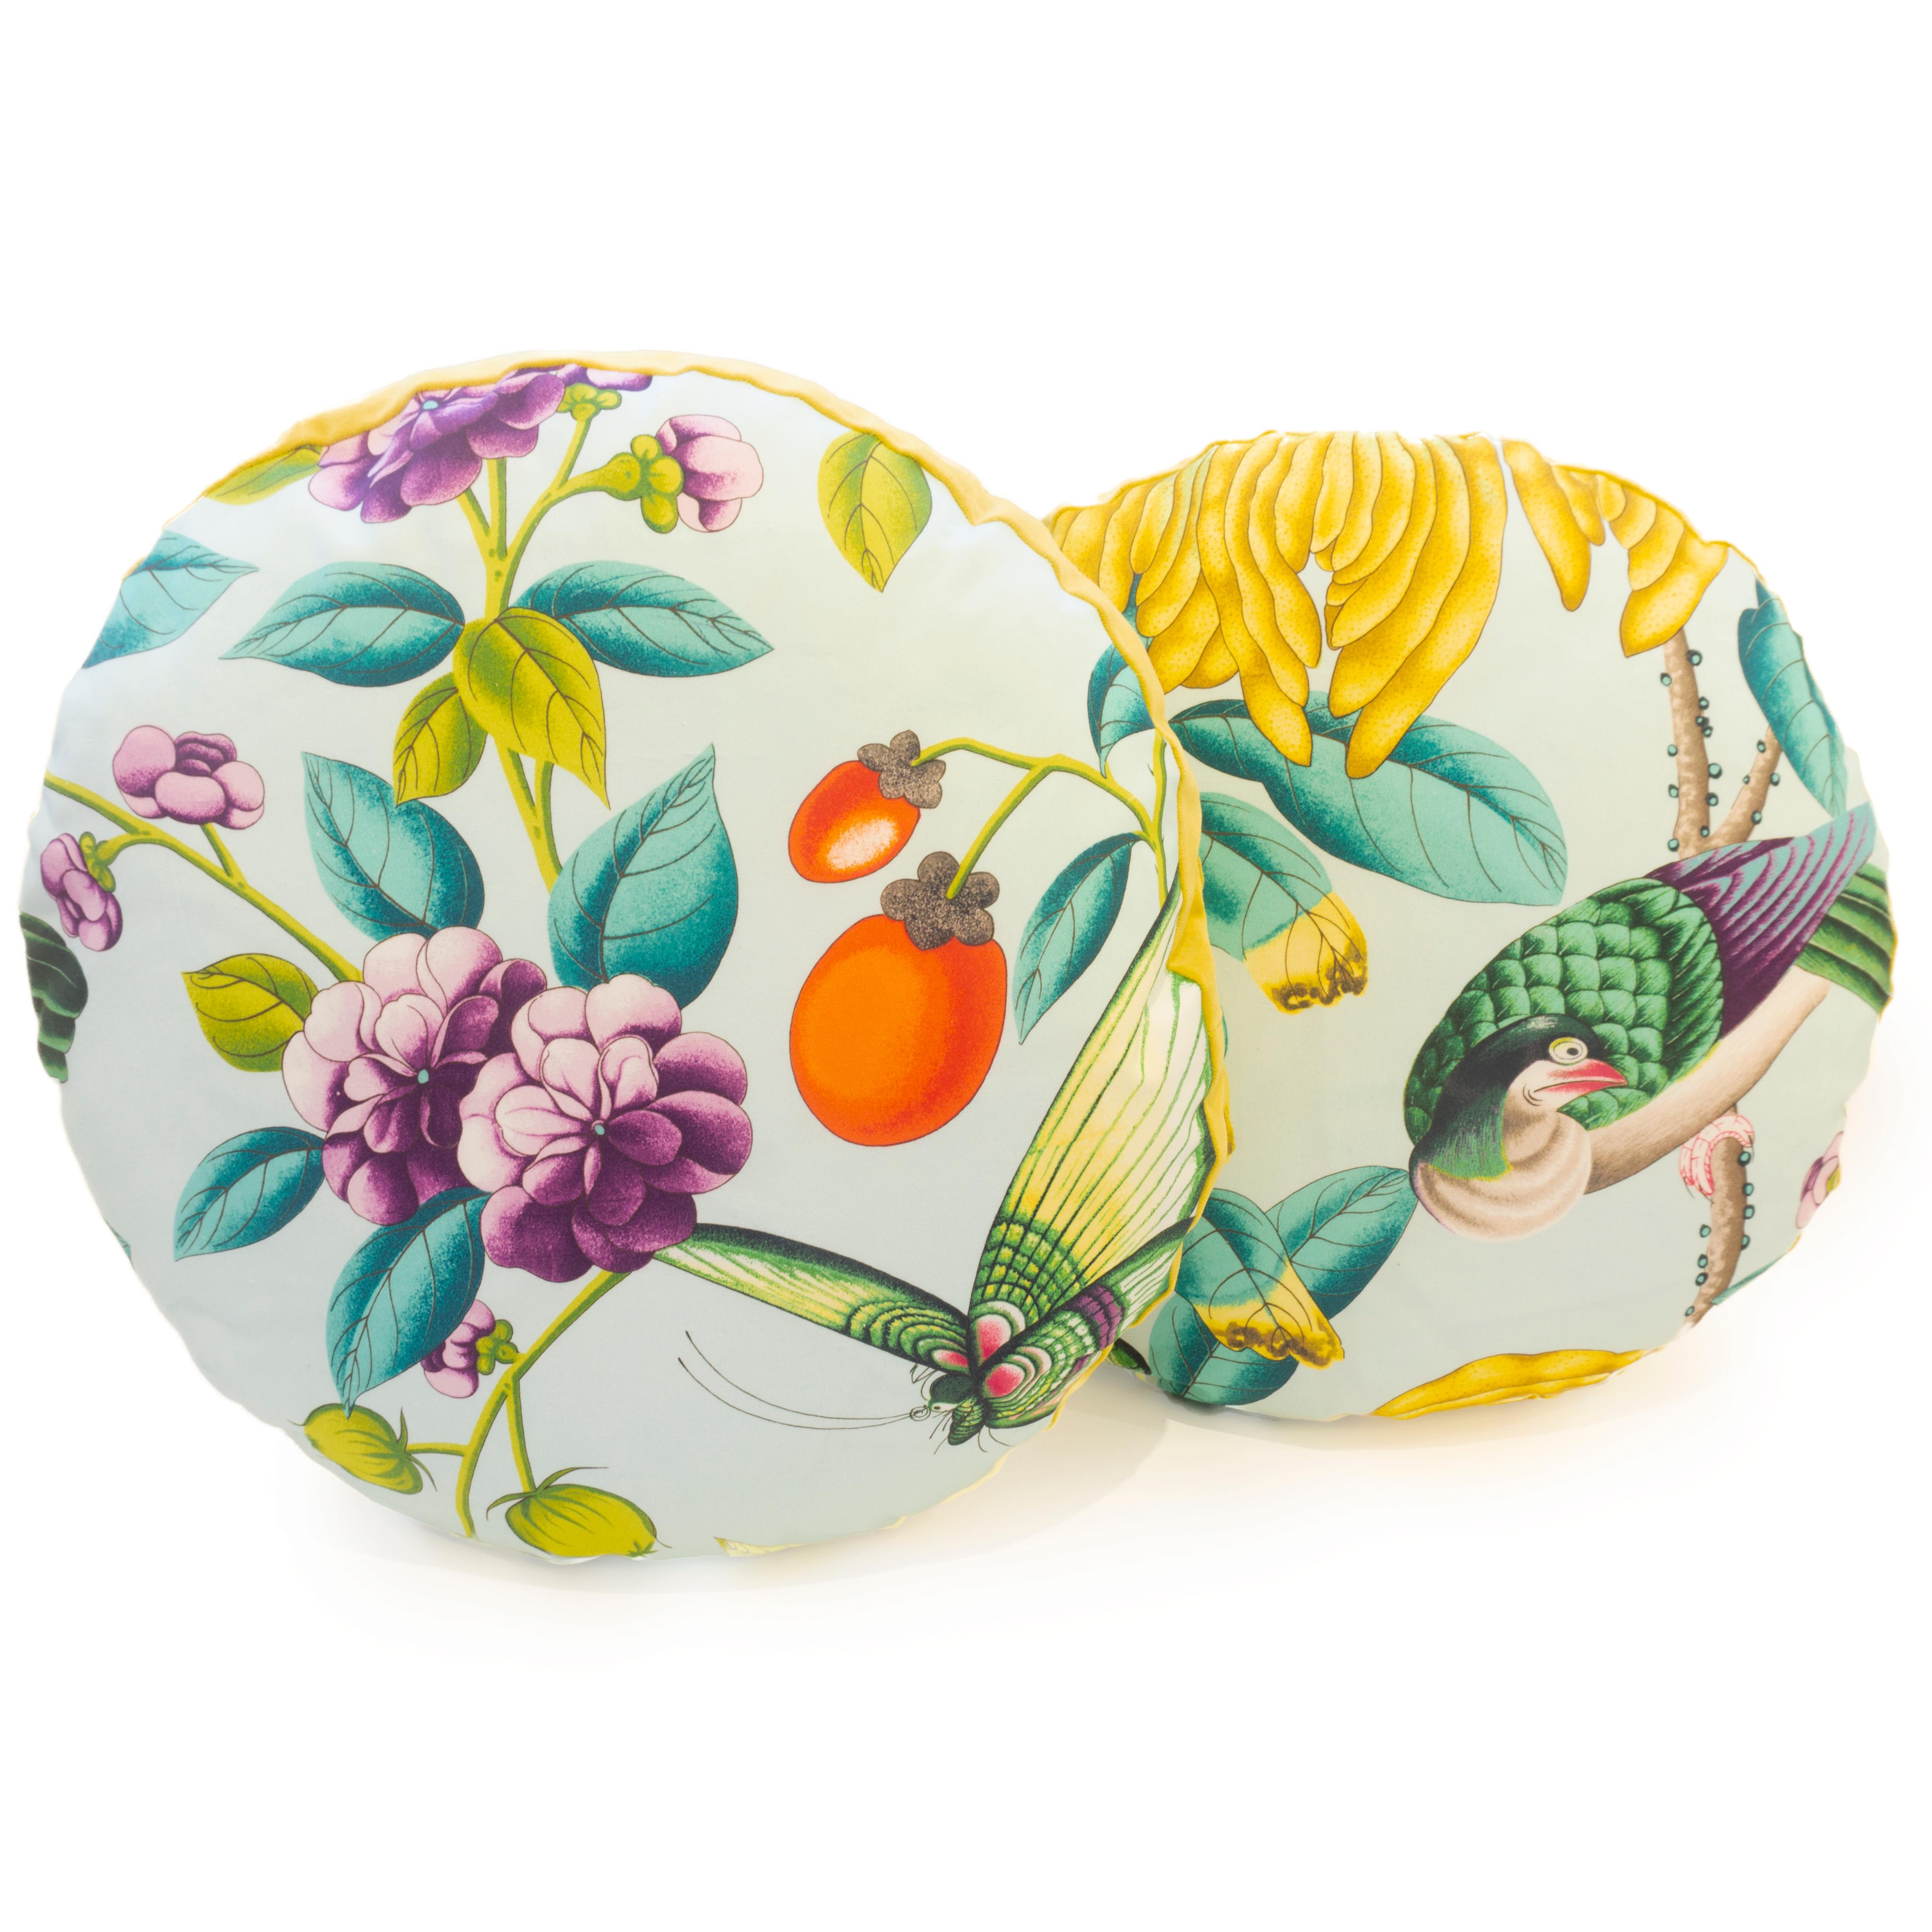 Handcrafted round throw pillows sewn in a fabric featuring flowers, leaves and birds in vibrant colors. The back is sewn in a golden yellow velvet. Made in our studio in Norwalk, Connecticut. This pillow can also be made to order with your own